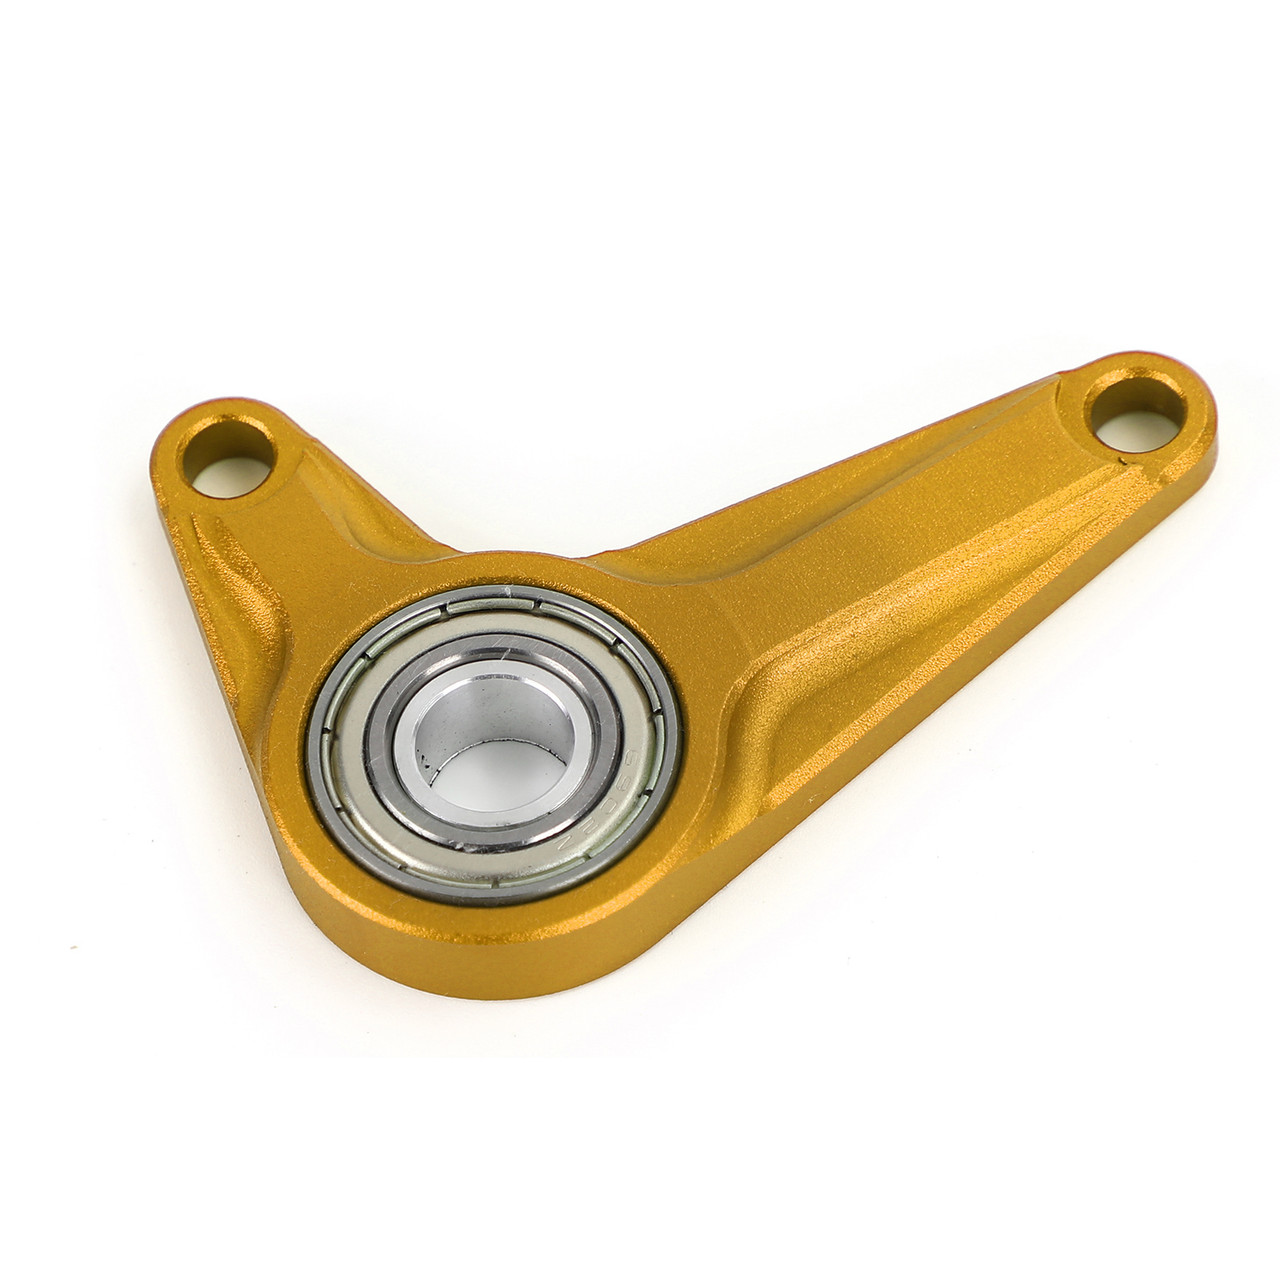 Cnc Shifting Gear Stabilizer High Modified Gold For Honda Msx 125 Sf Grom 20-21